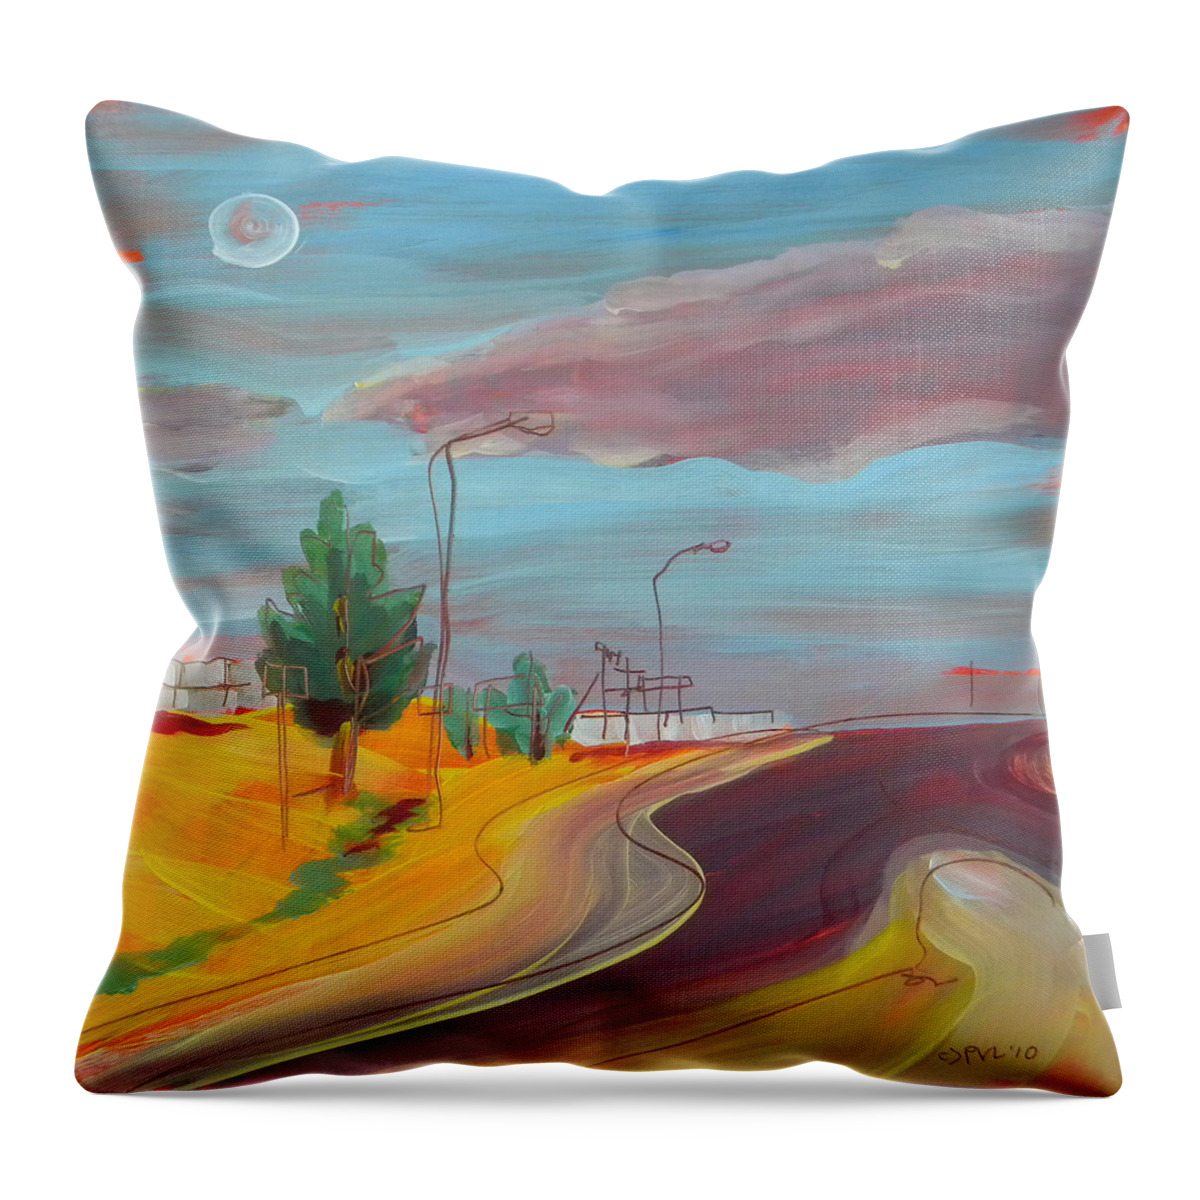 Landscape Throw Pillow featuring the painting Arizona Highway 1 #1 by Pam Van Londen